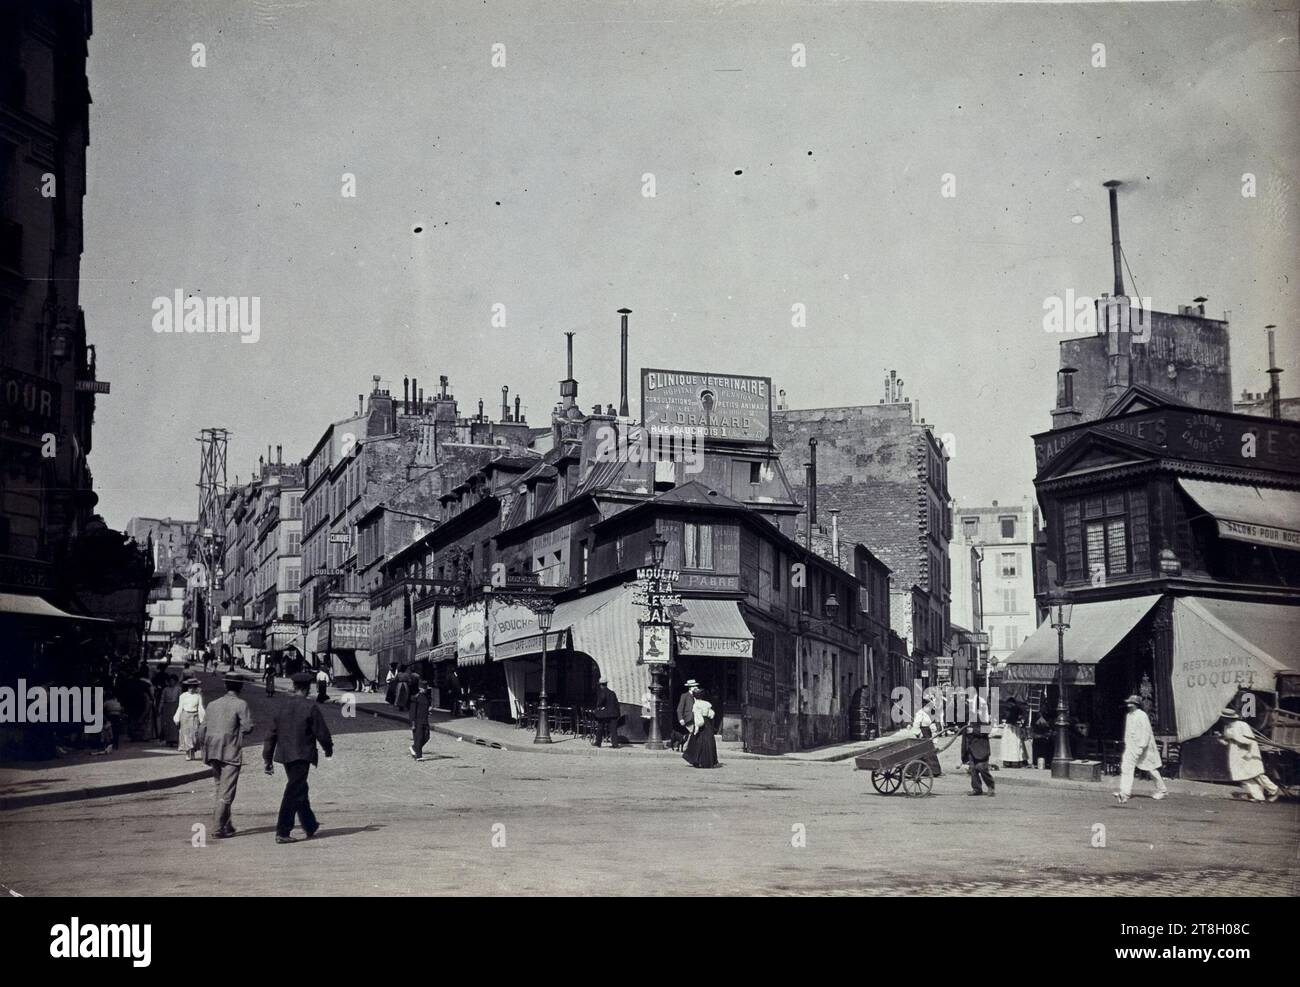 Rue Lepic taken from the Place Blanche, 18th arrondissement, Paris, September 1904, Biard, Ch., Photographer, En 9-1904, Photography, Graphic arts, Photography, Gelatino silver bromide print, Dimensions - Work: Height: 11.3 cm, Width: 16.1 cm, Dimensions - Antique mount:, Height: 18.2 cm, Width: 24.2 cm Stock Photo